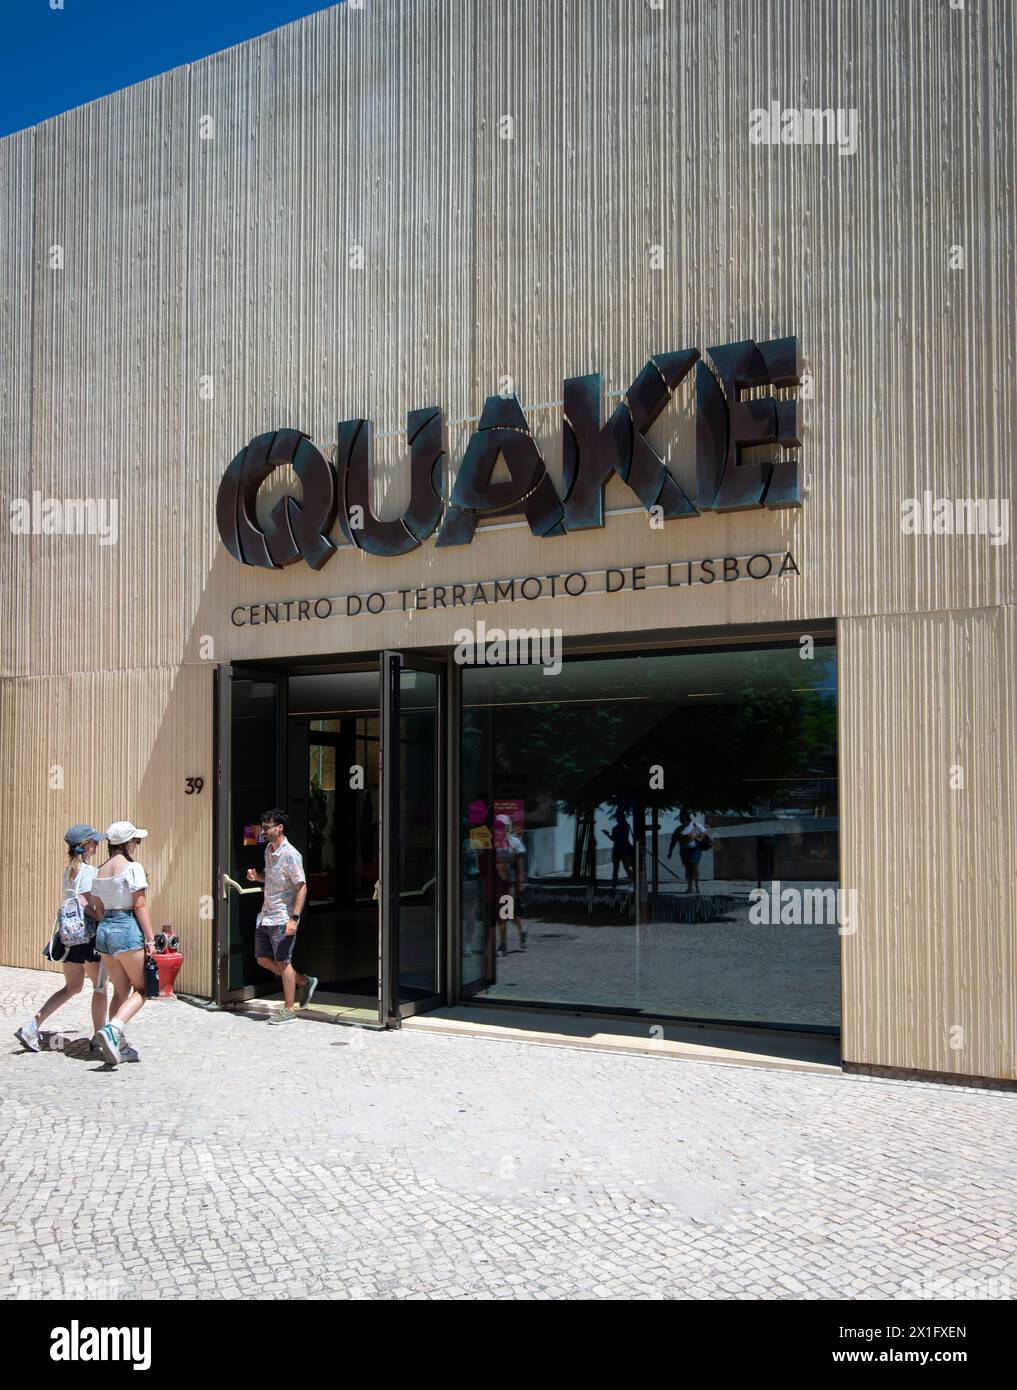 QUAKE Lisbon Earthquake Museum, Belém in Lisbon, Portugal.  Entrance to Quake, Centro Do Terramoto De Lisboa.  The 1,800 Square Meter Museum dedicated to the Great Lisbon Earthquake of 1755 opened to the public in April 2022.  The museum received an award for Historic Experience – Outstanding Achievement in 2022 and was named Europe’s Best Tourist Experience in 2023. Stock Photo